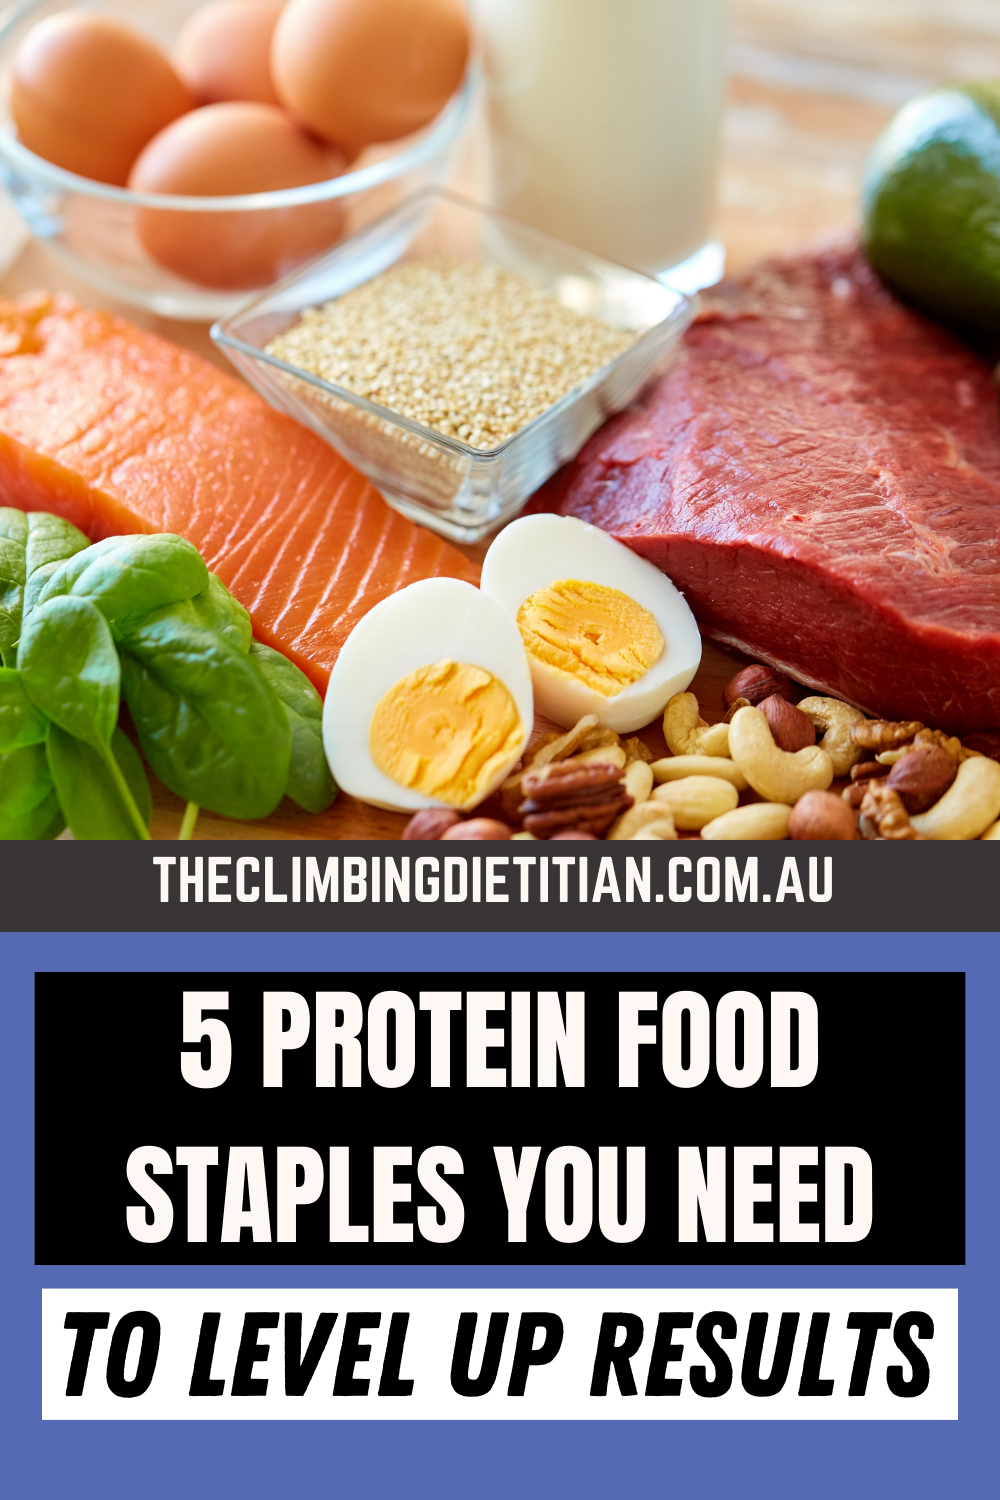 5 Protein Staples To Level Up Your Gym Gains Sports Dietitian Approved - Brisbane Dietitian